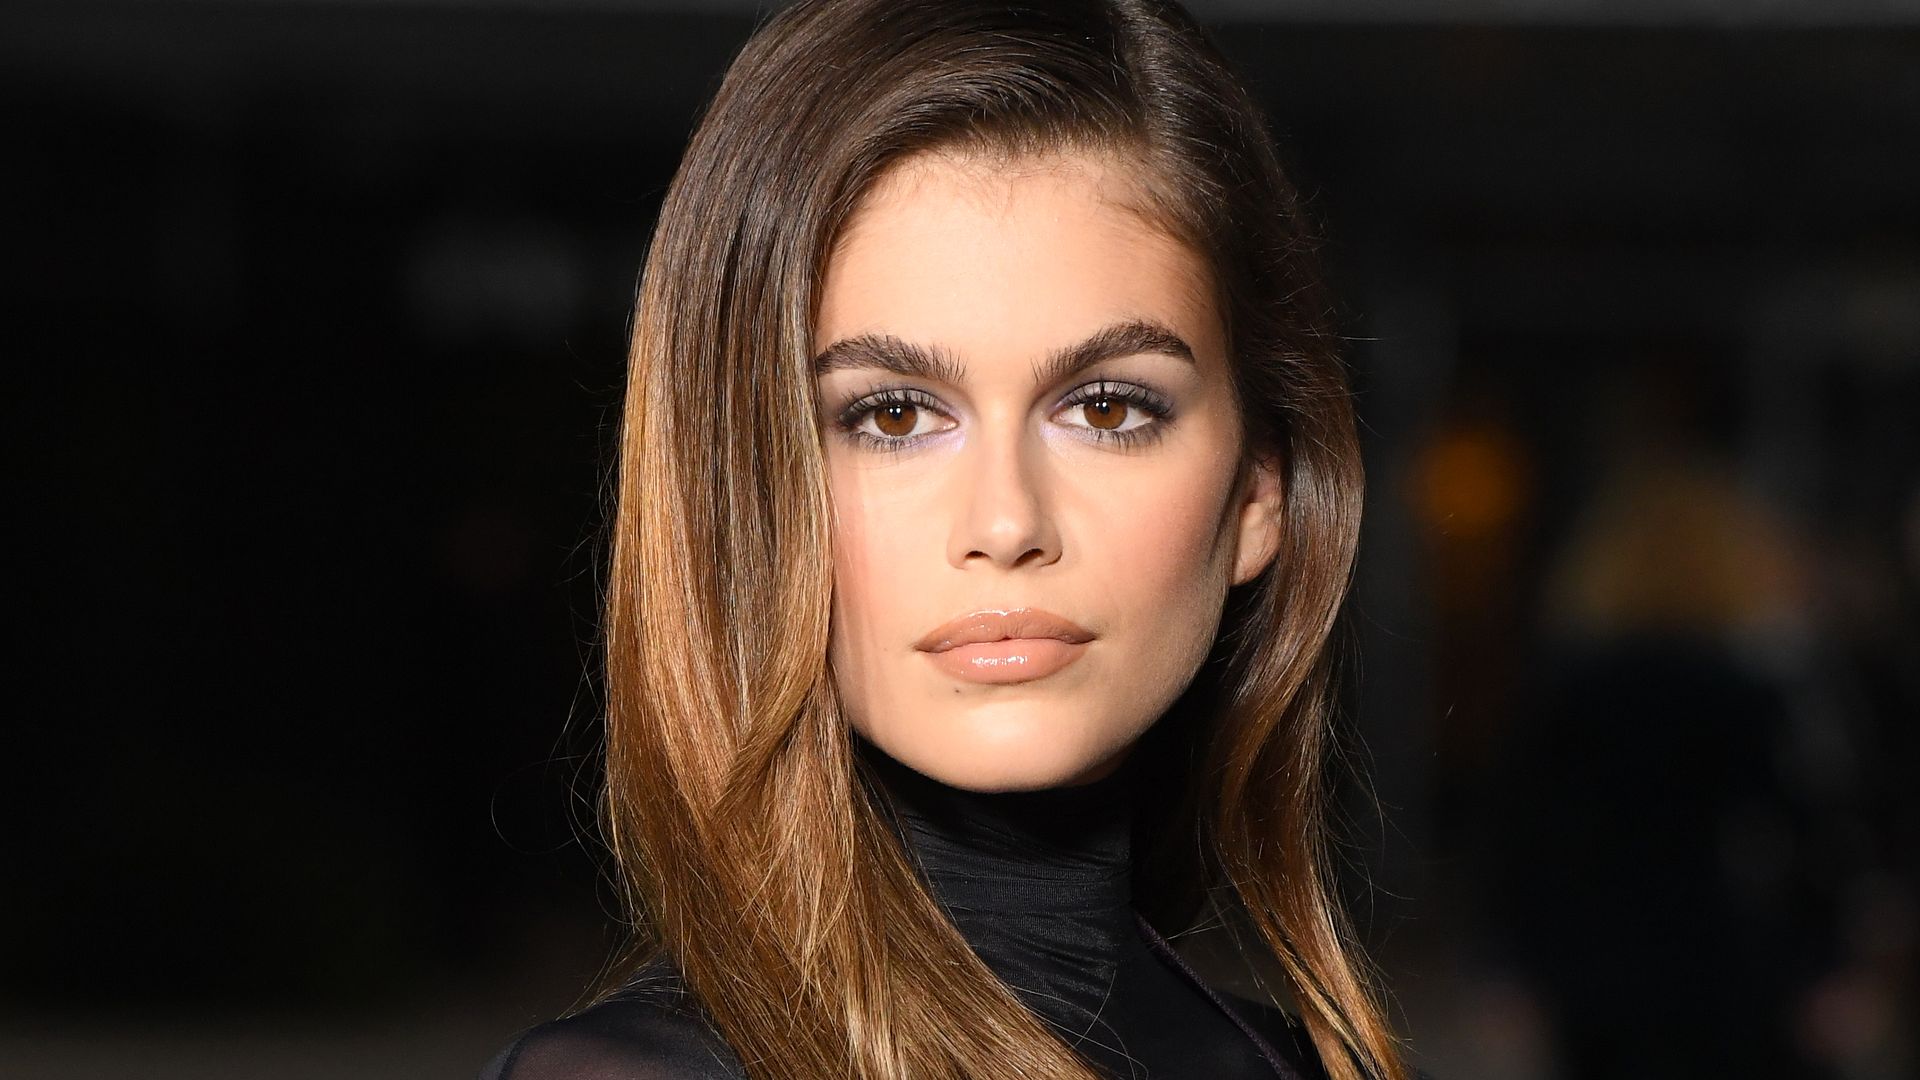 A guide to Kaia Gerber’s tattoos: What ink does Cindy Crawford’s daughter have?